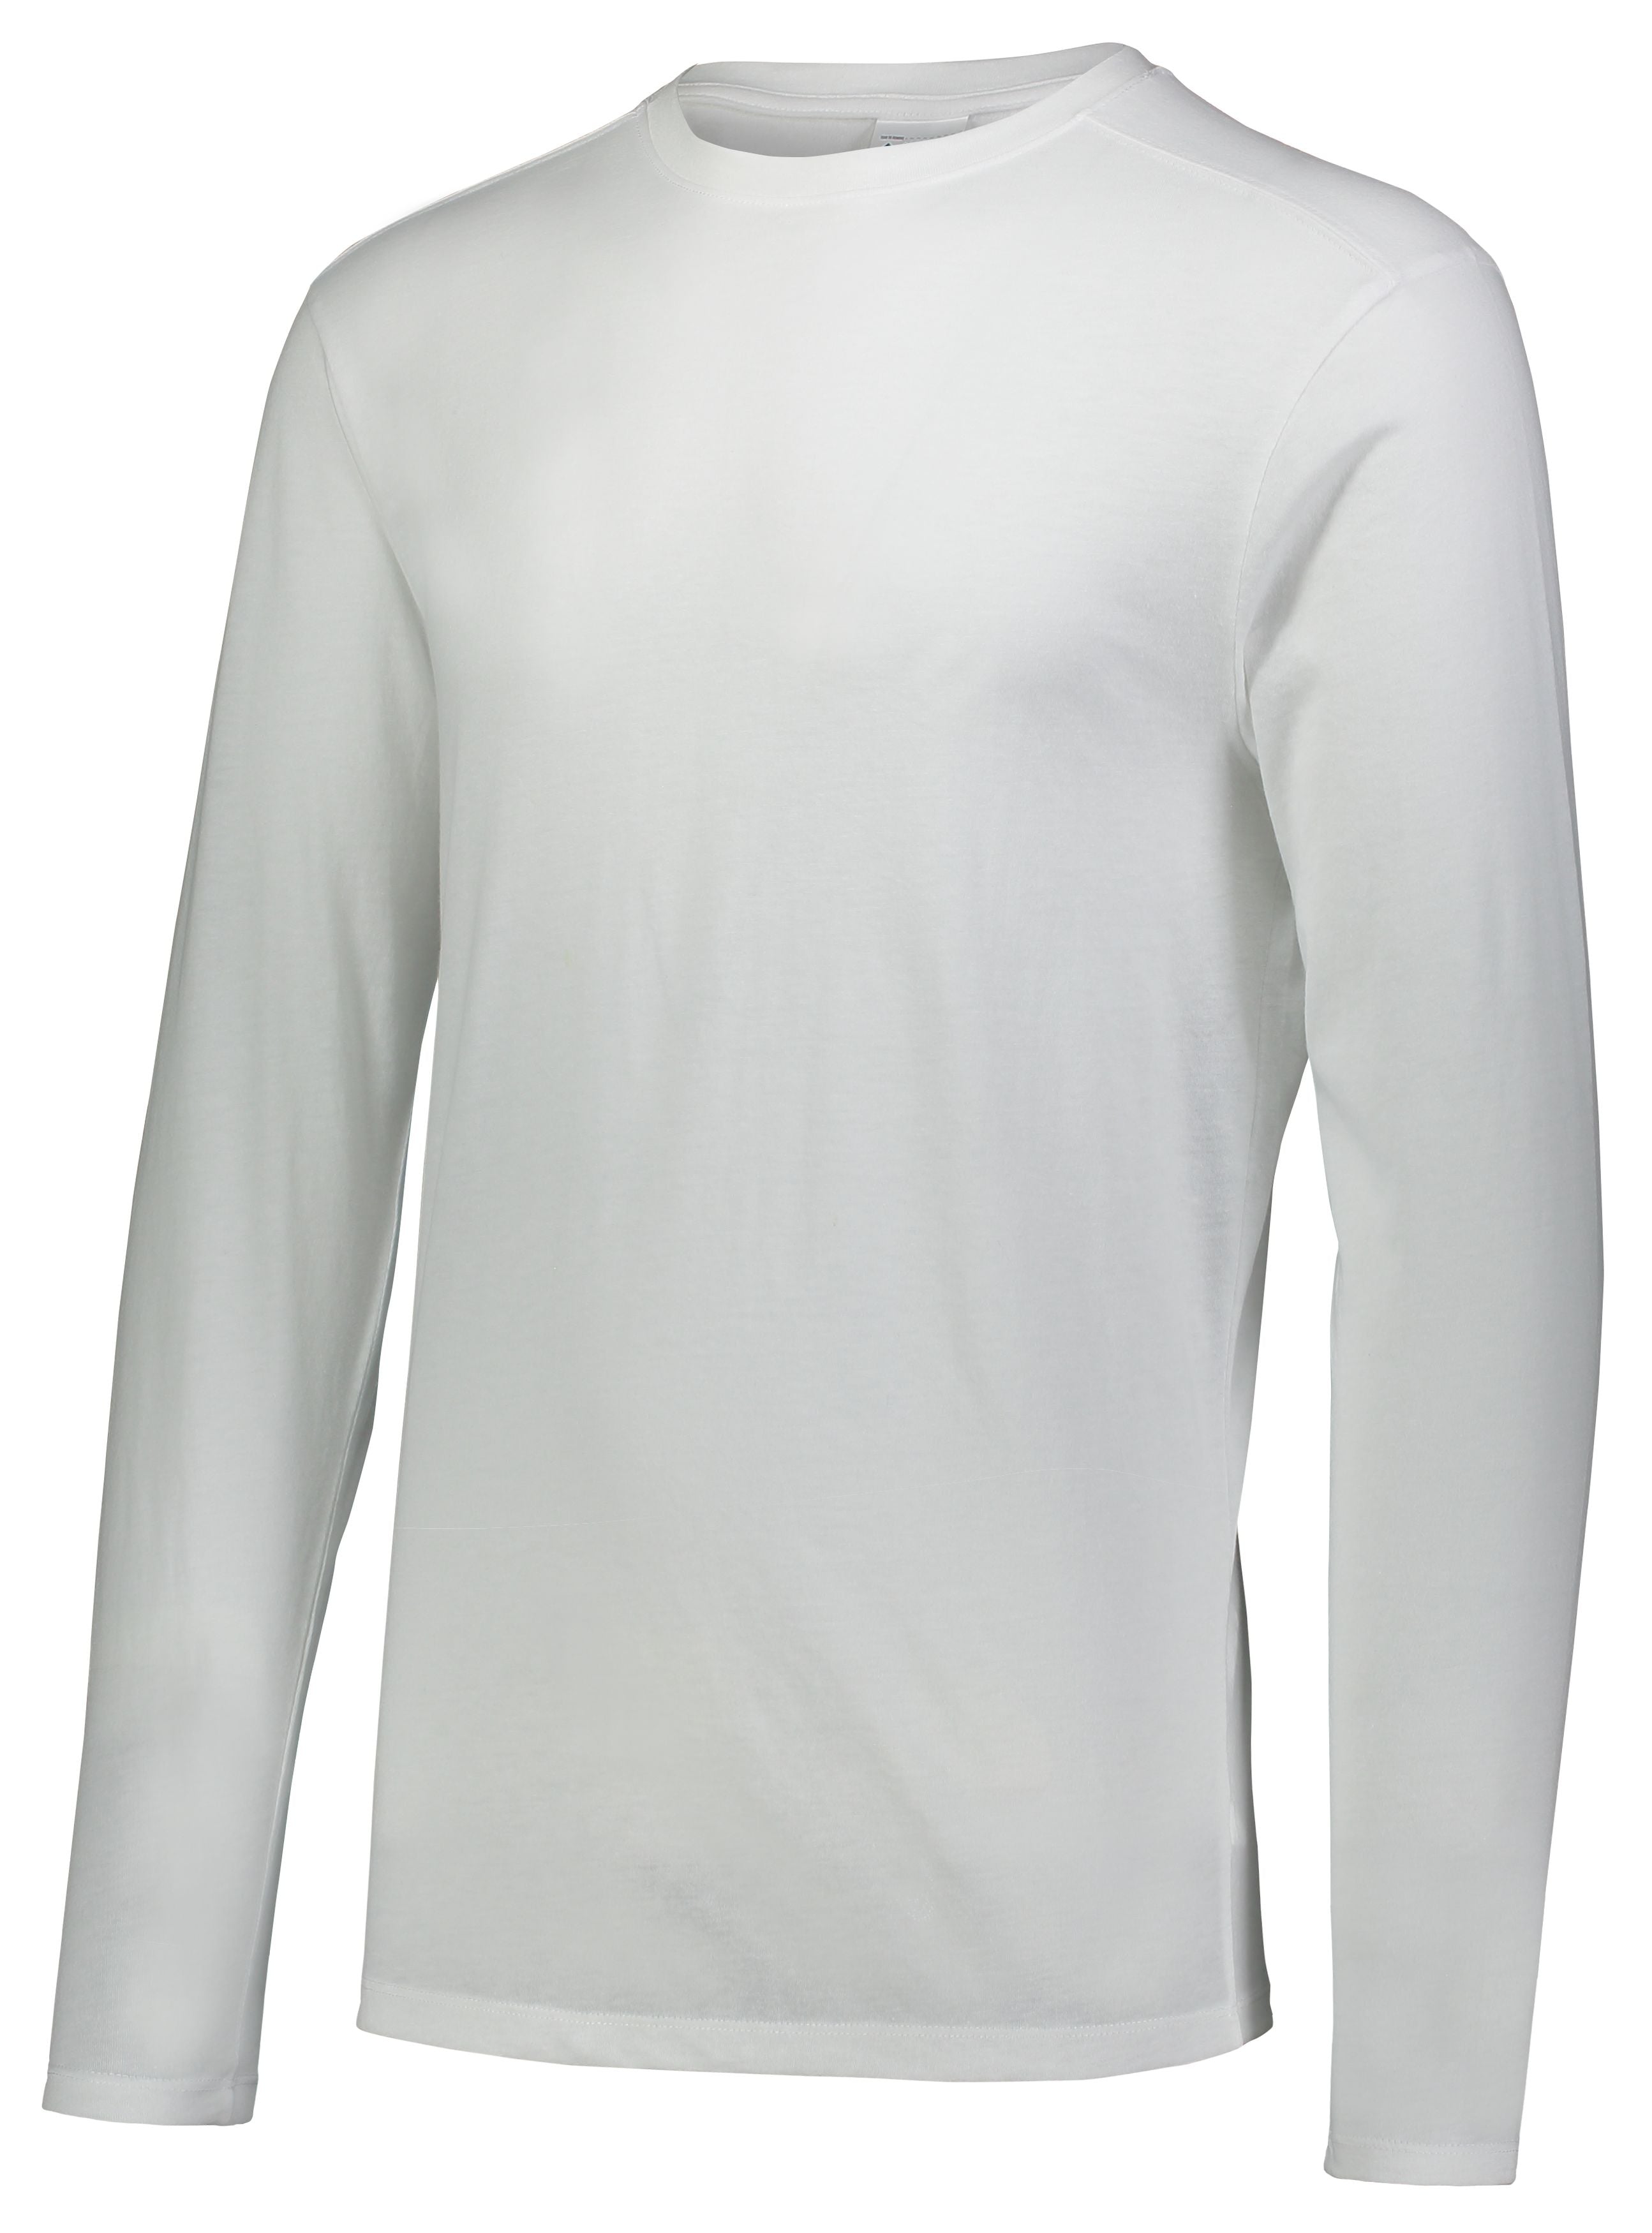 Augusta Sportswear Tri-Blend Long Sleeve Crew in White  -Part of the Adult, Augusta-Products, Shirts product lines at KanaleyCreations.com